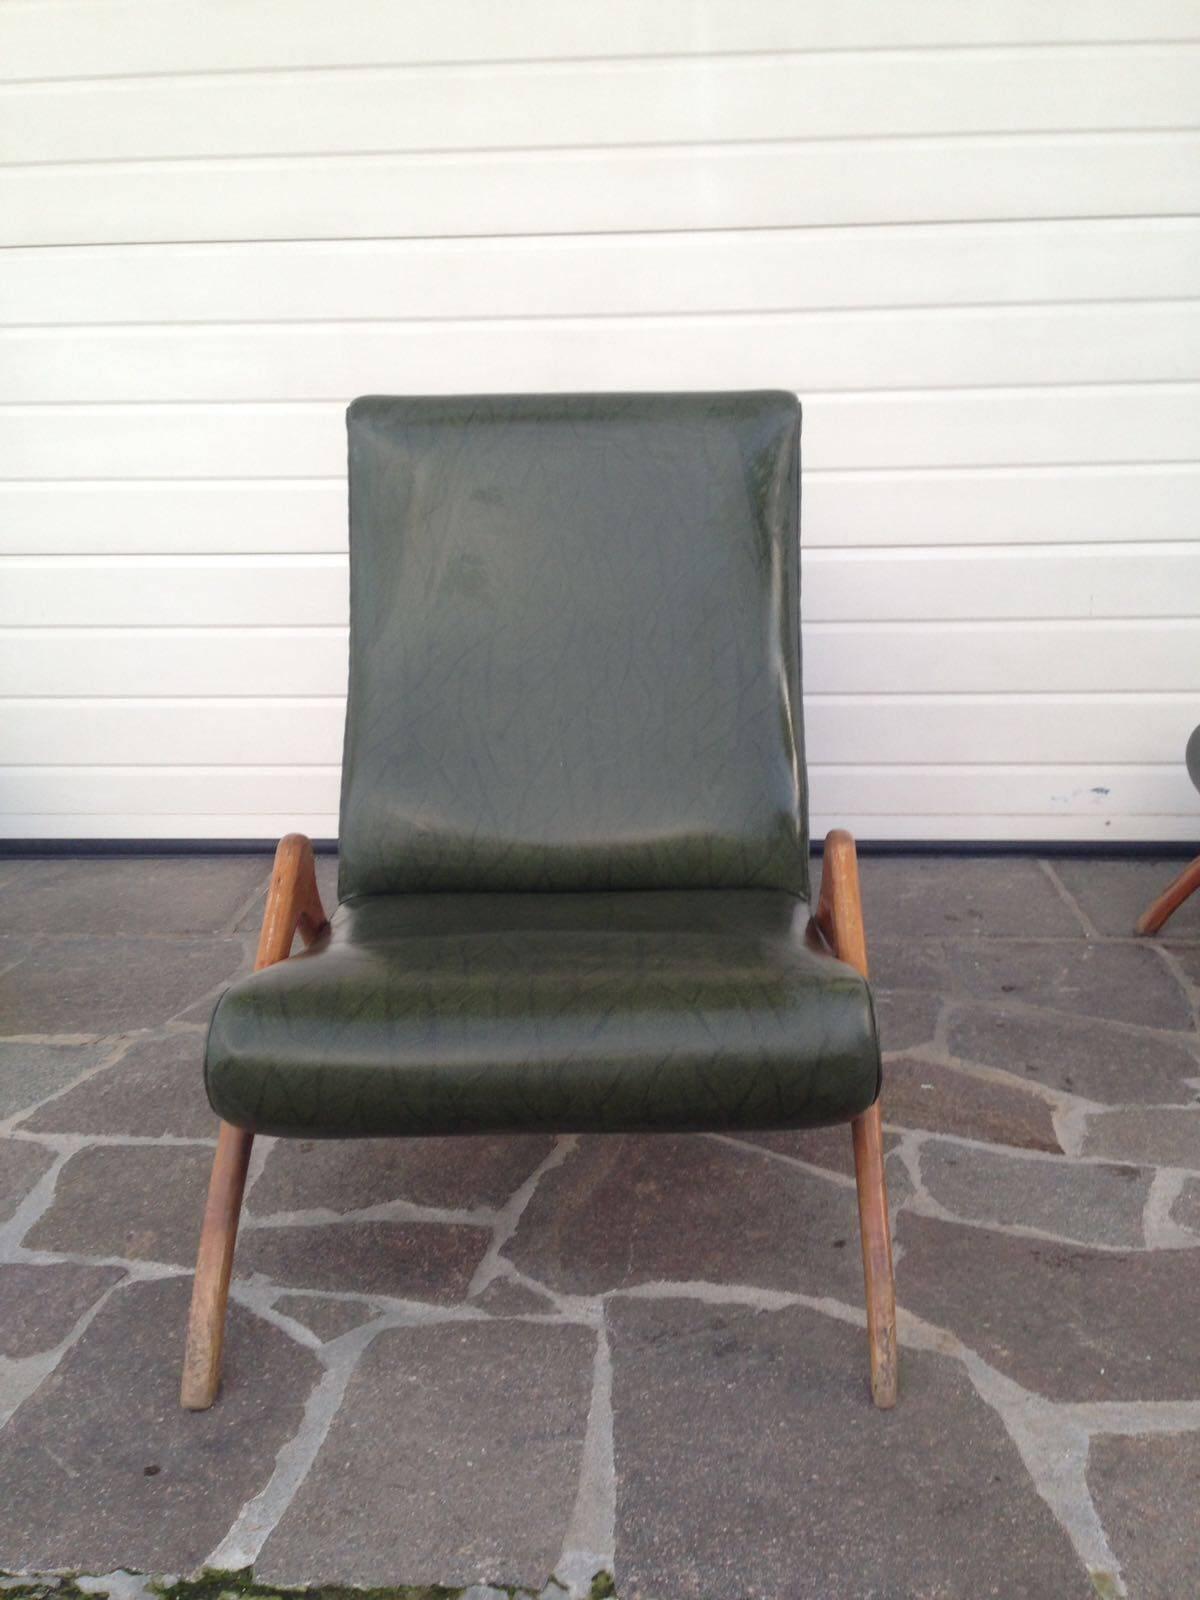 Vintage stunning armchair or chaise longue in style of Carlo Mollino / Guglielmo Ulrich / Antonino Gorgone. Made in Italy, 1950 period. Faux dark green leather. Good vintage condition. Original upholstery. There are available two pieces. The price